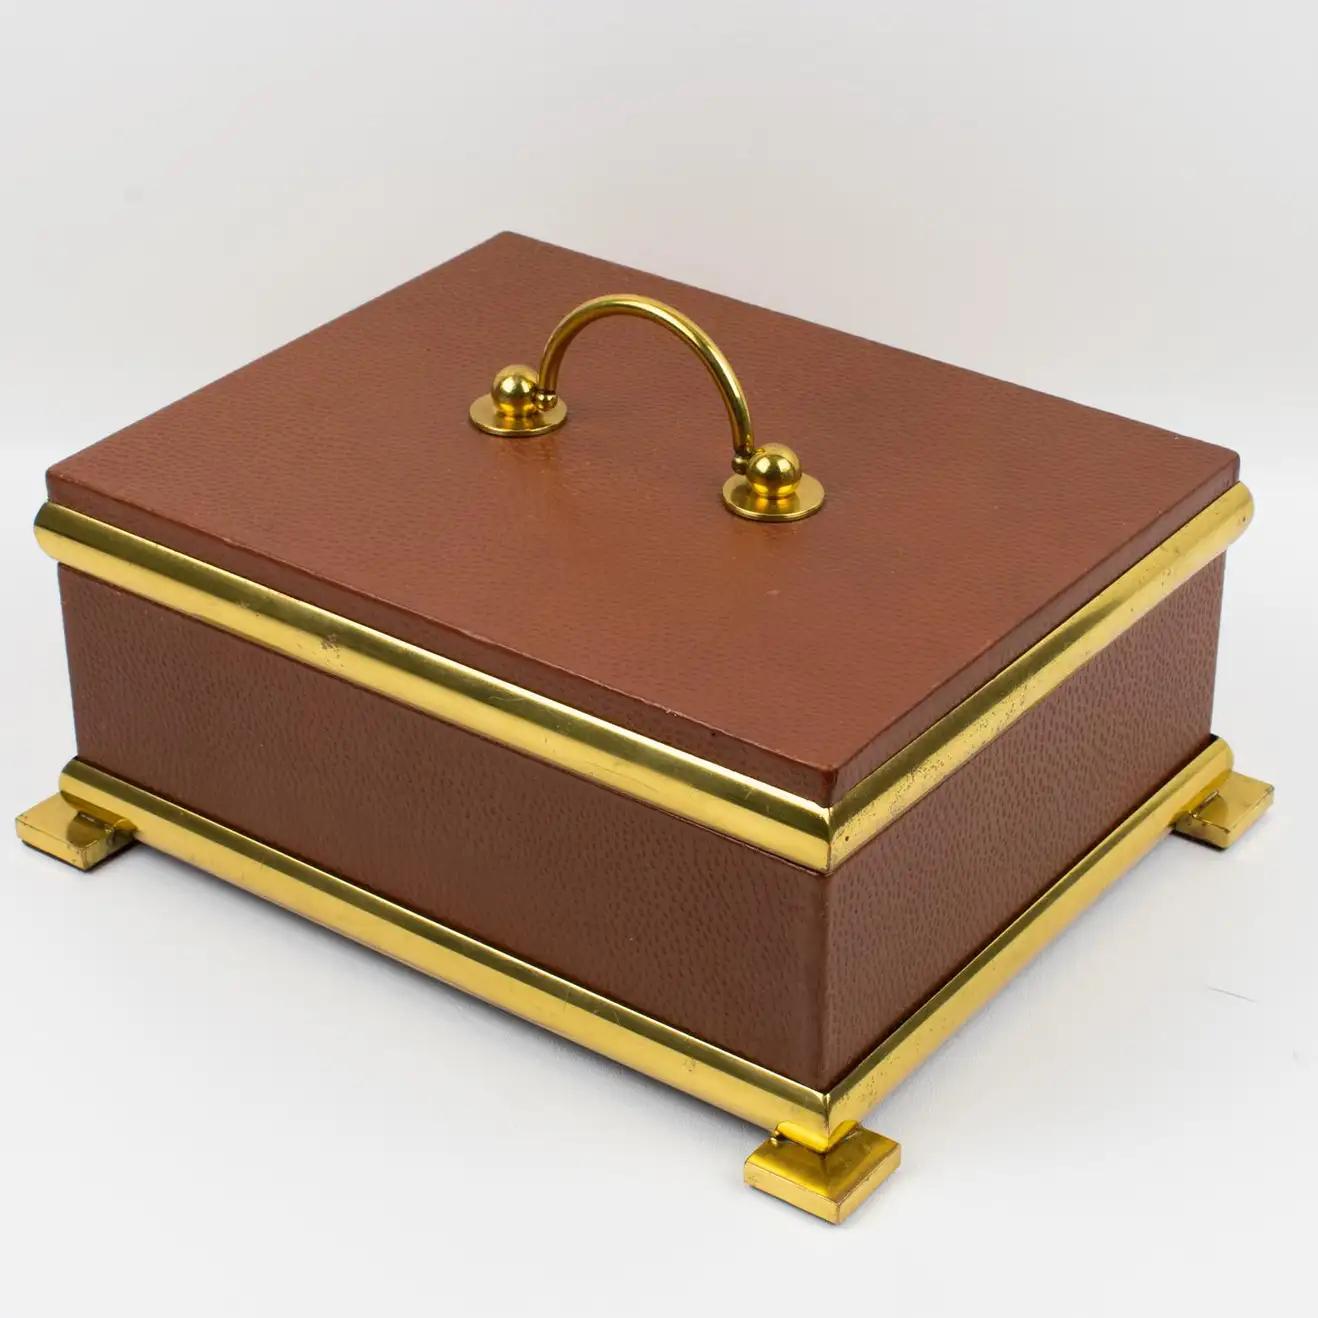 Empire Revival Italian Leather and Brass Decorative Box, 1950s Empire Style For Sale